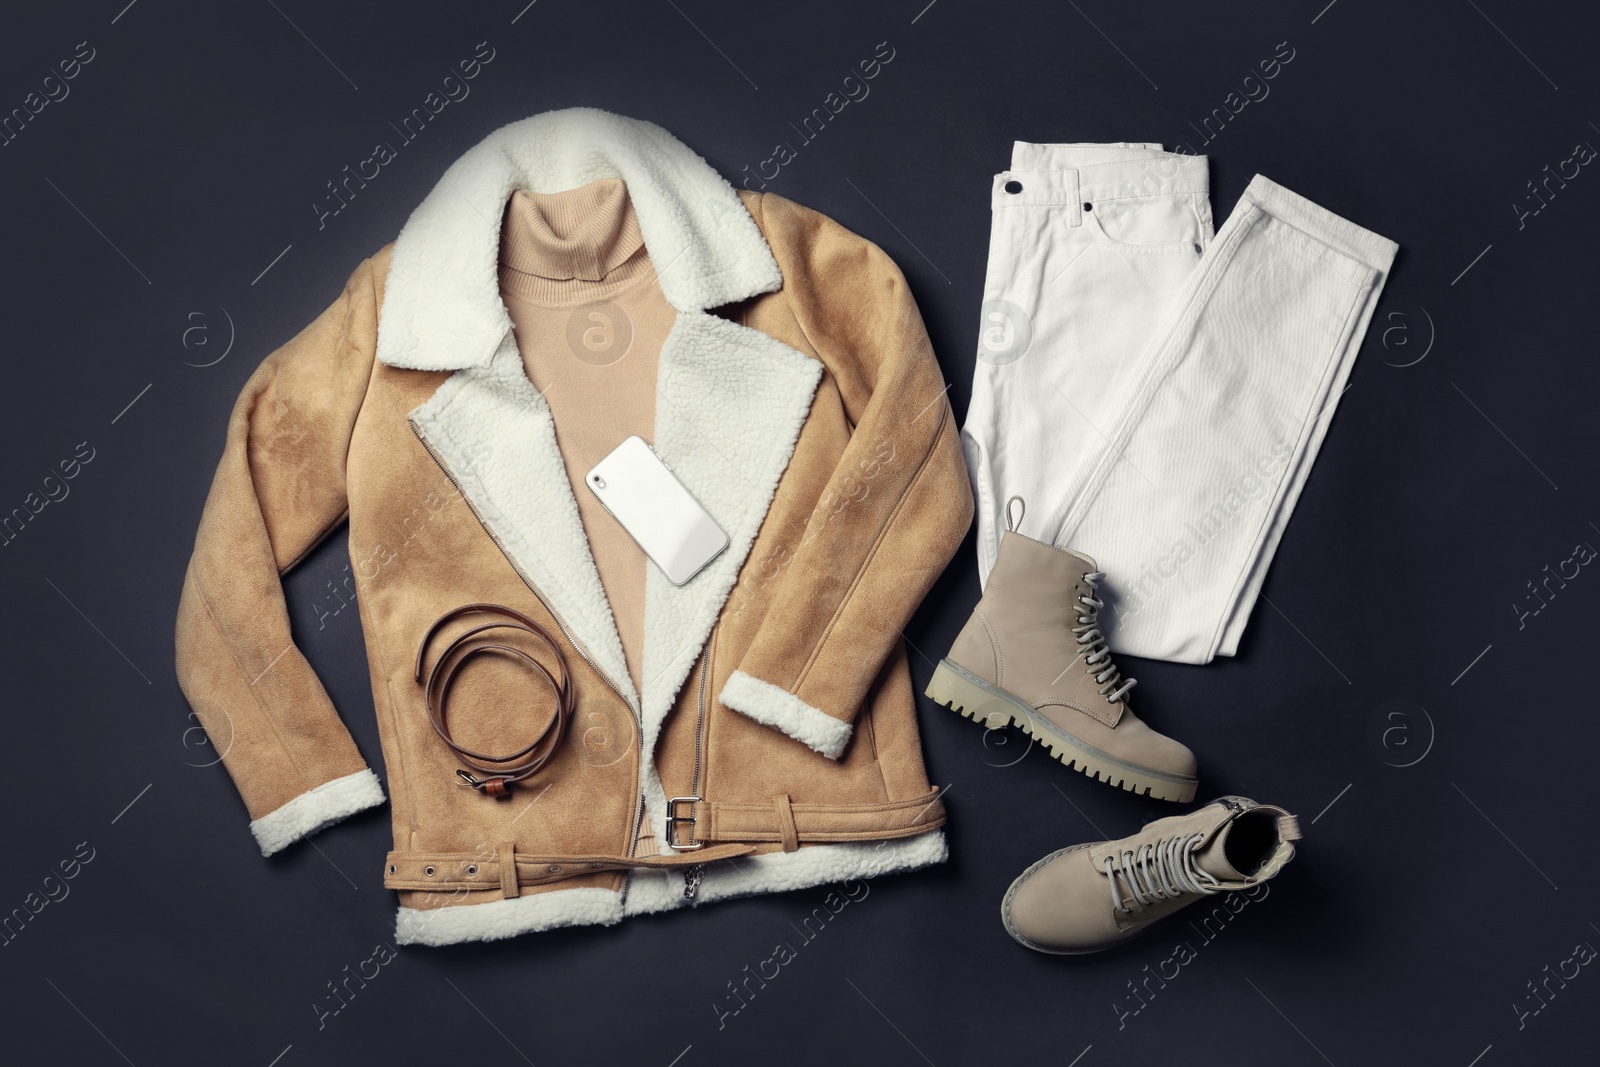 Photo of Stylish boots, new clothes, smartphone and accessories on black background, flat lay